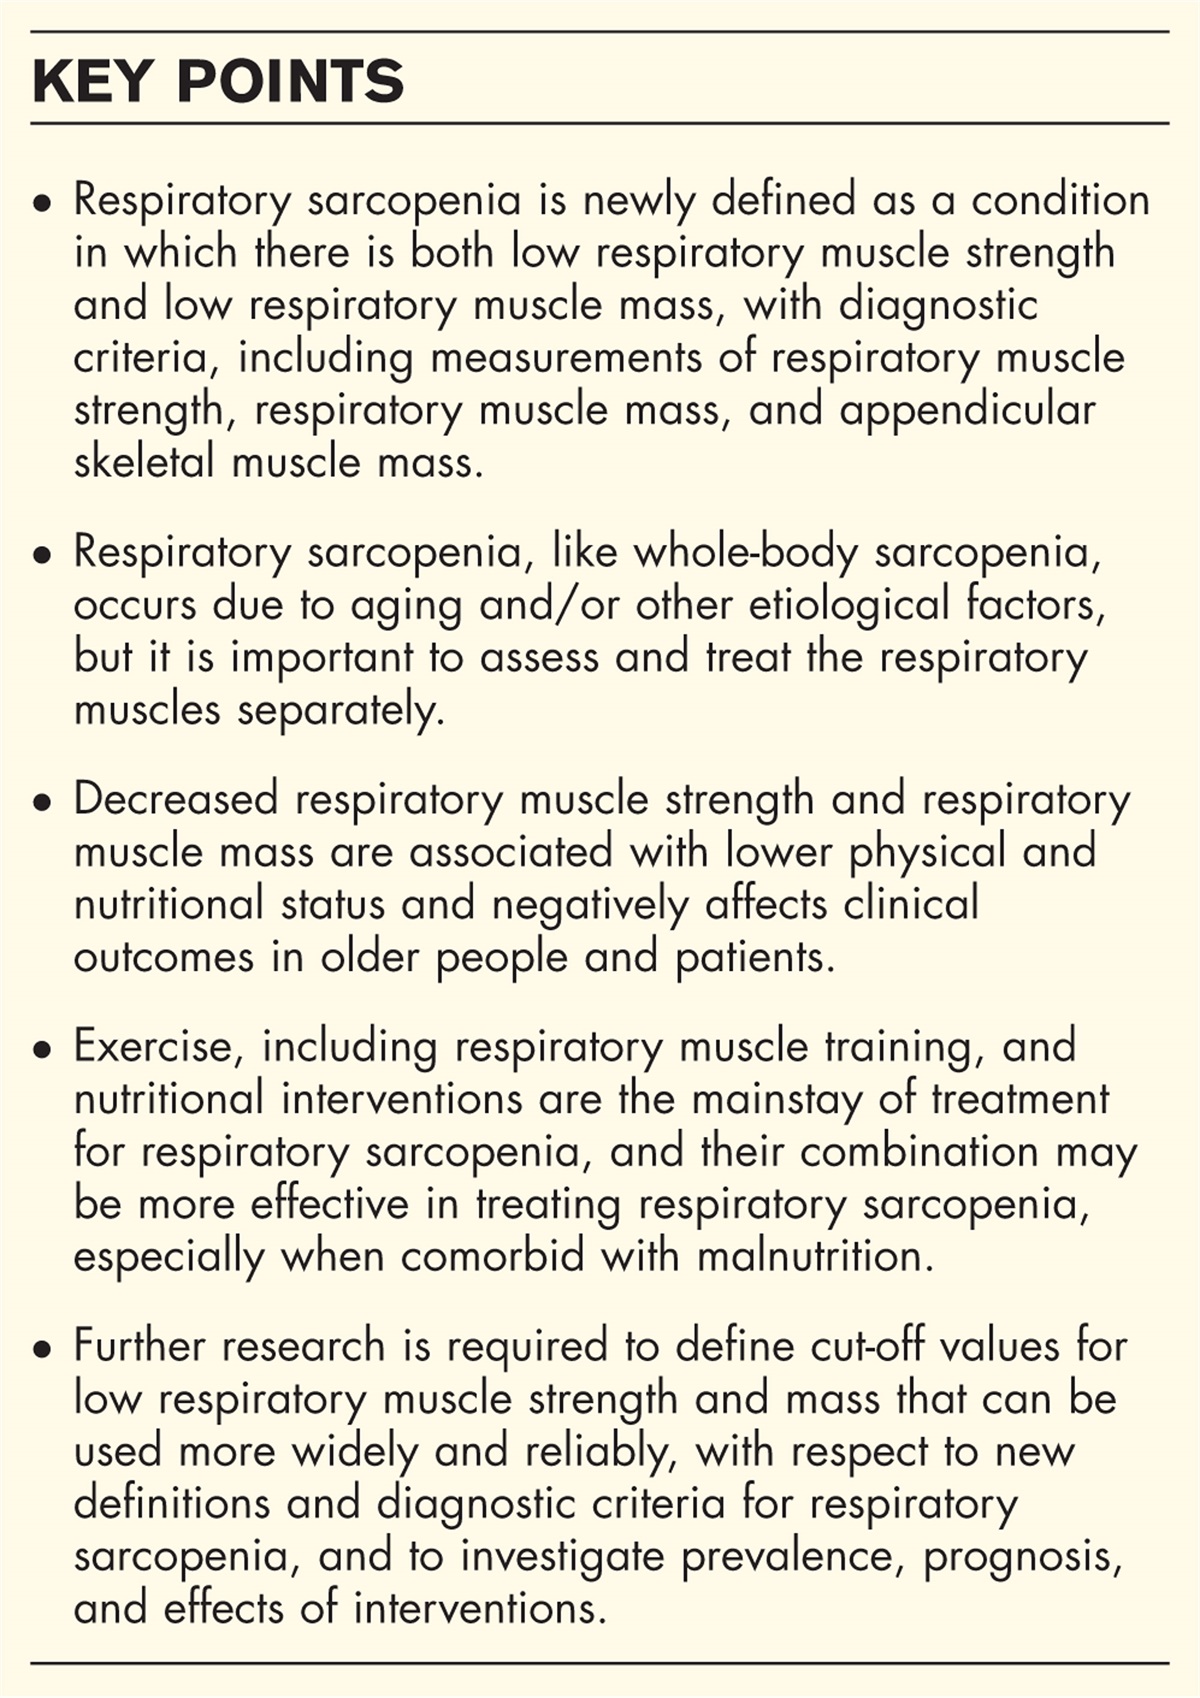 Definition, diagnosis, and treatment of respiratory sarcopenia